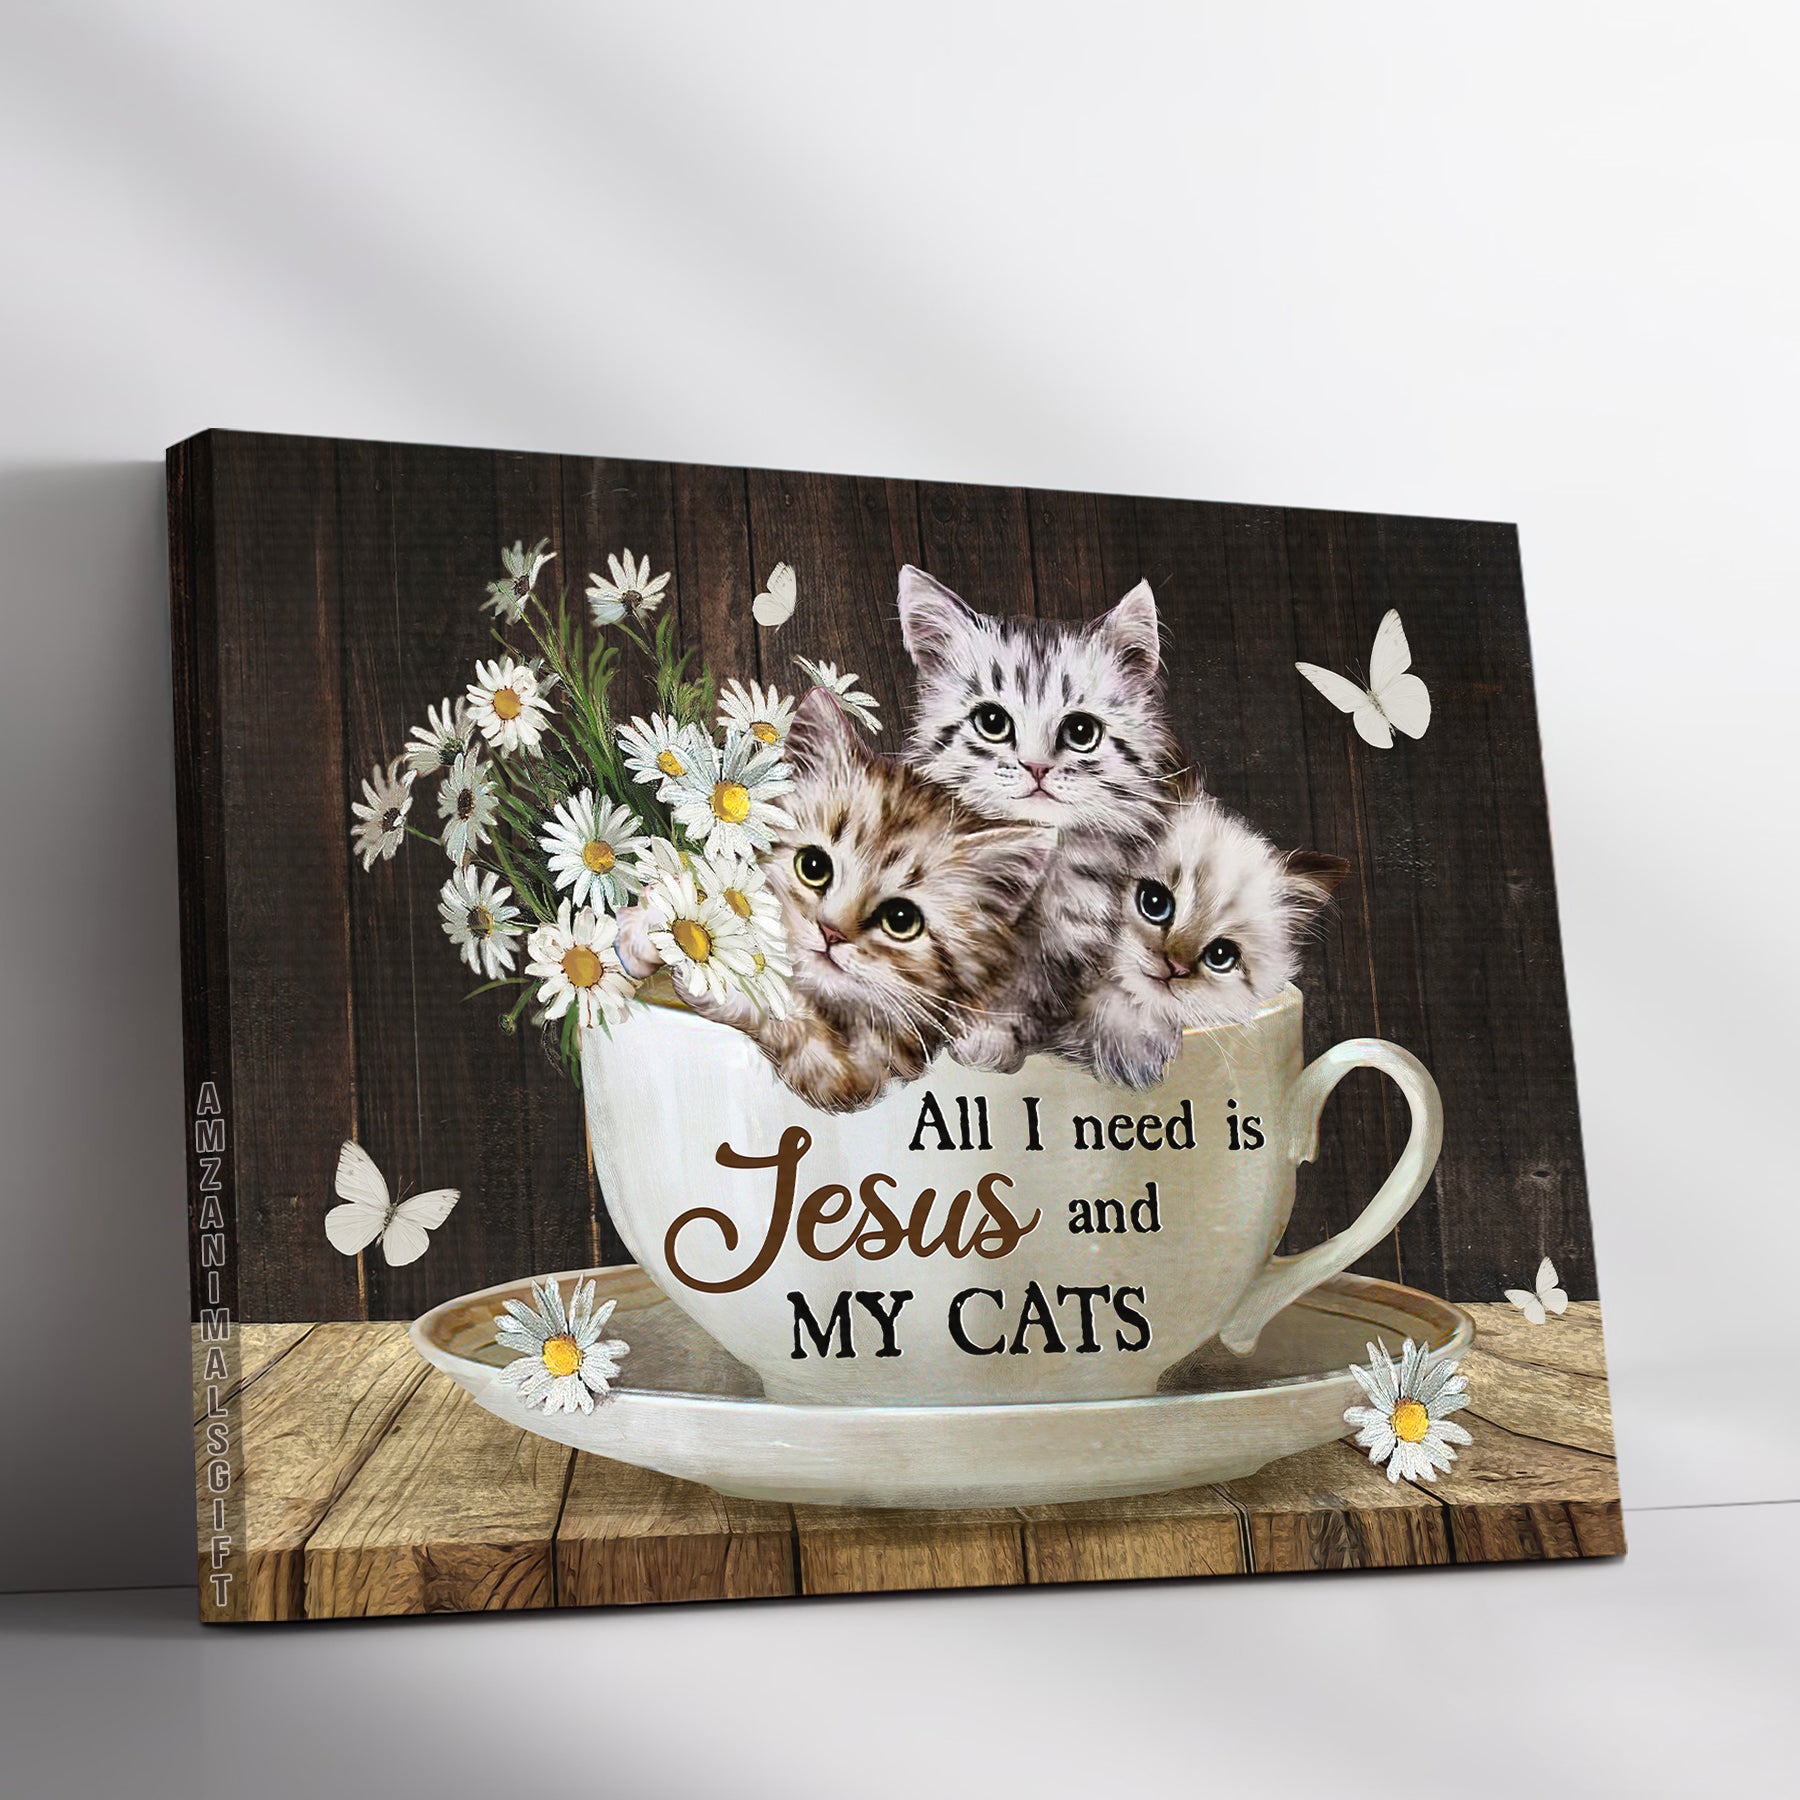 Cat & Jesus Premium Wrapped Landscape Canvas - White Cat Drawing, Daisy Flower, Tea Cup, All I Need Is Jesus And My Cats - Gift For Christian